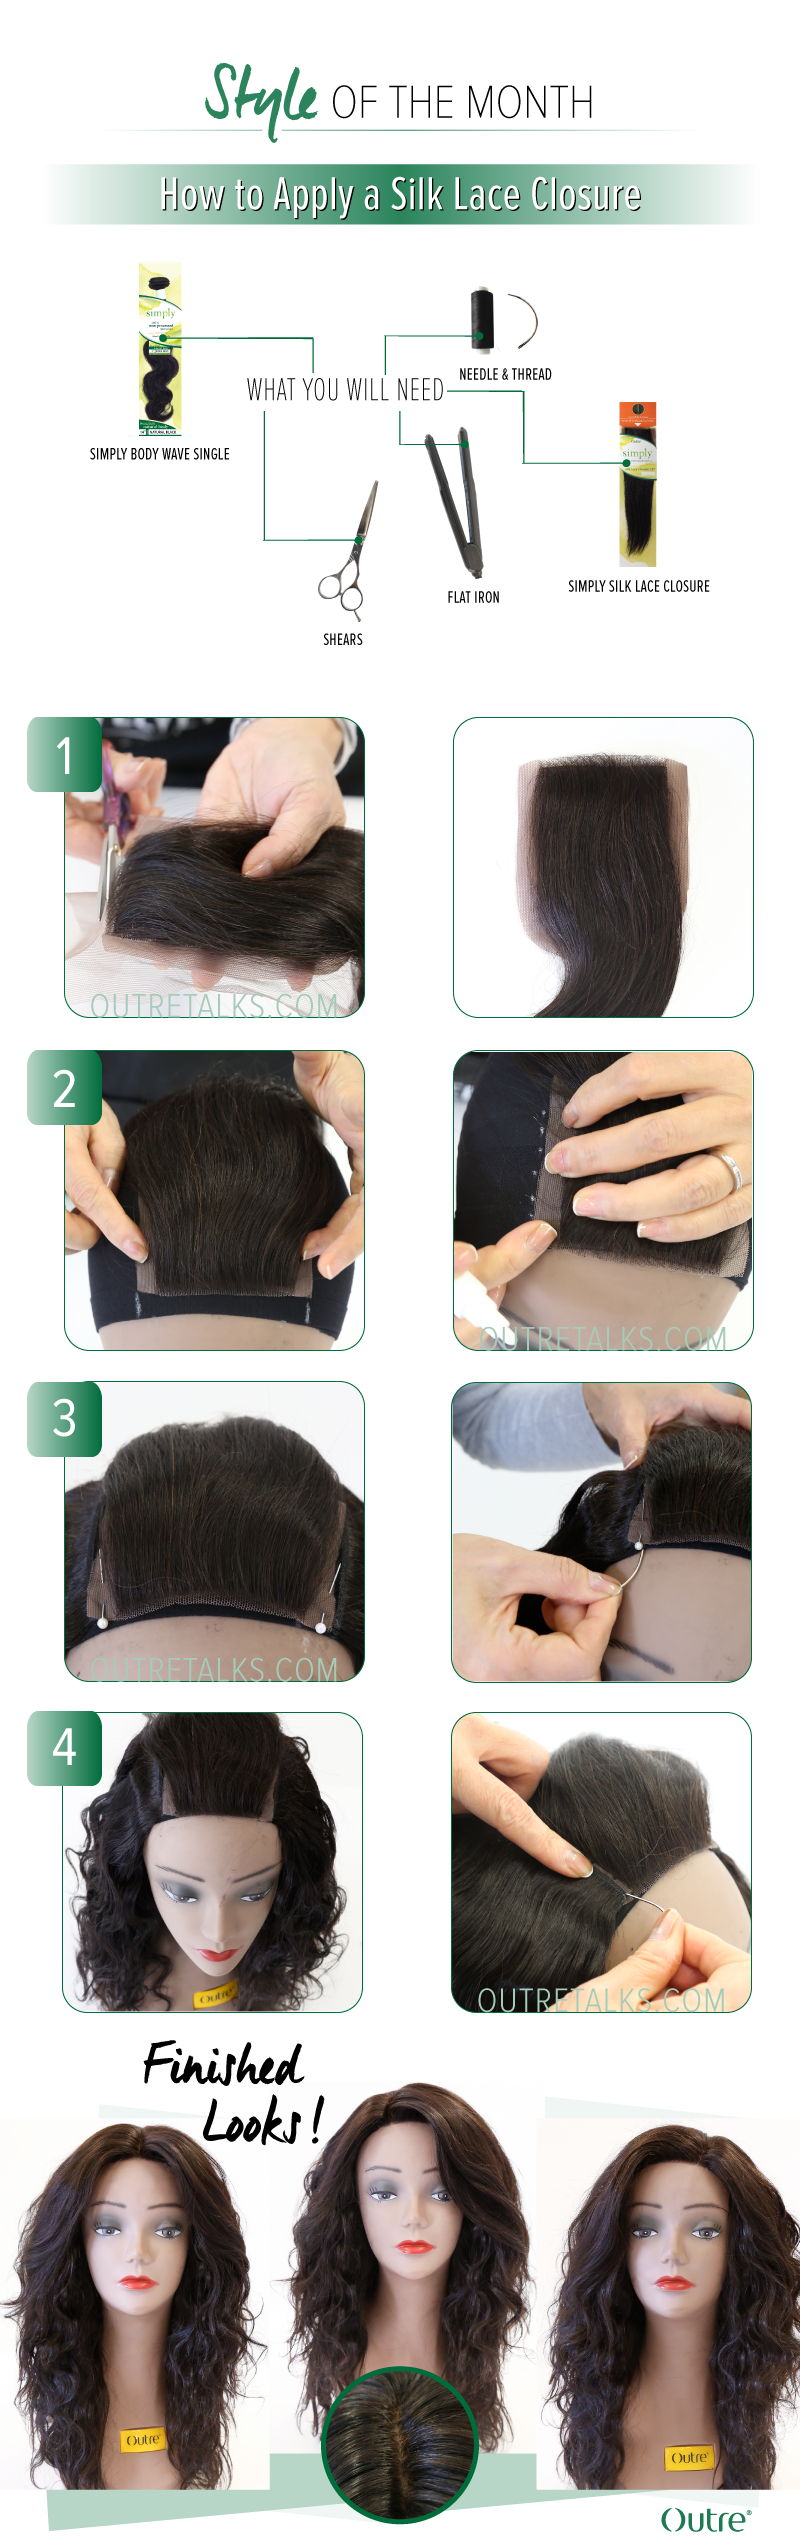 How to Apply Lace Closure to Weave Hair or Wigs